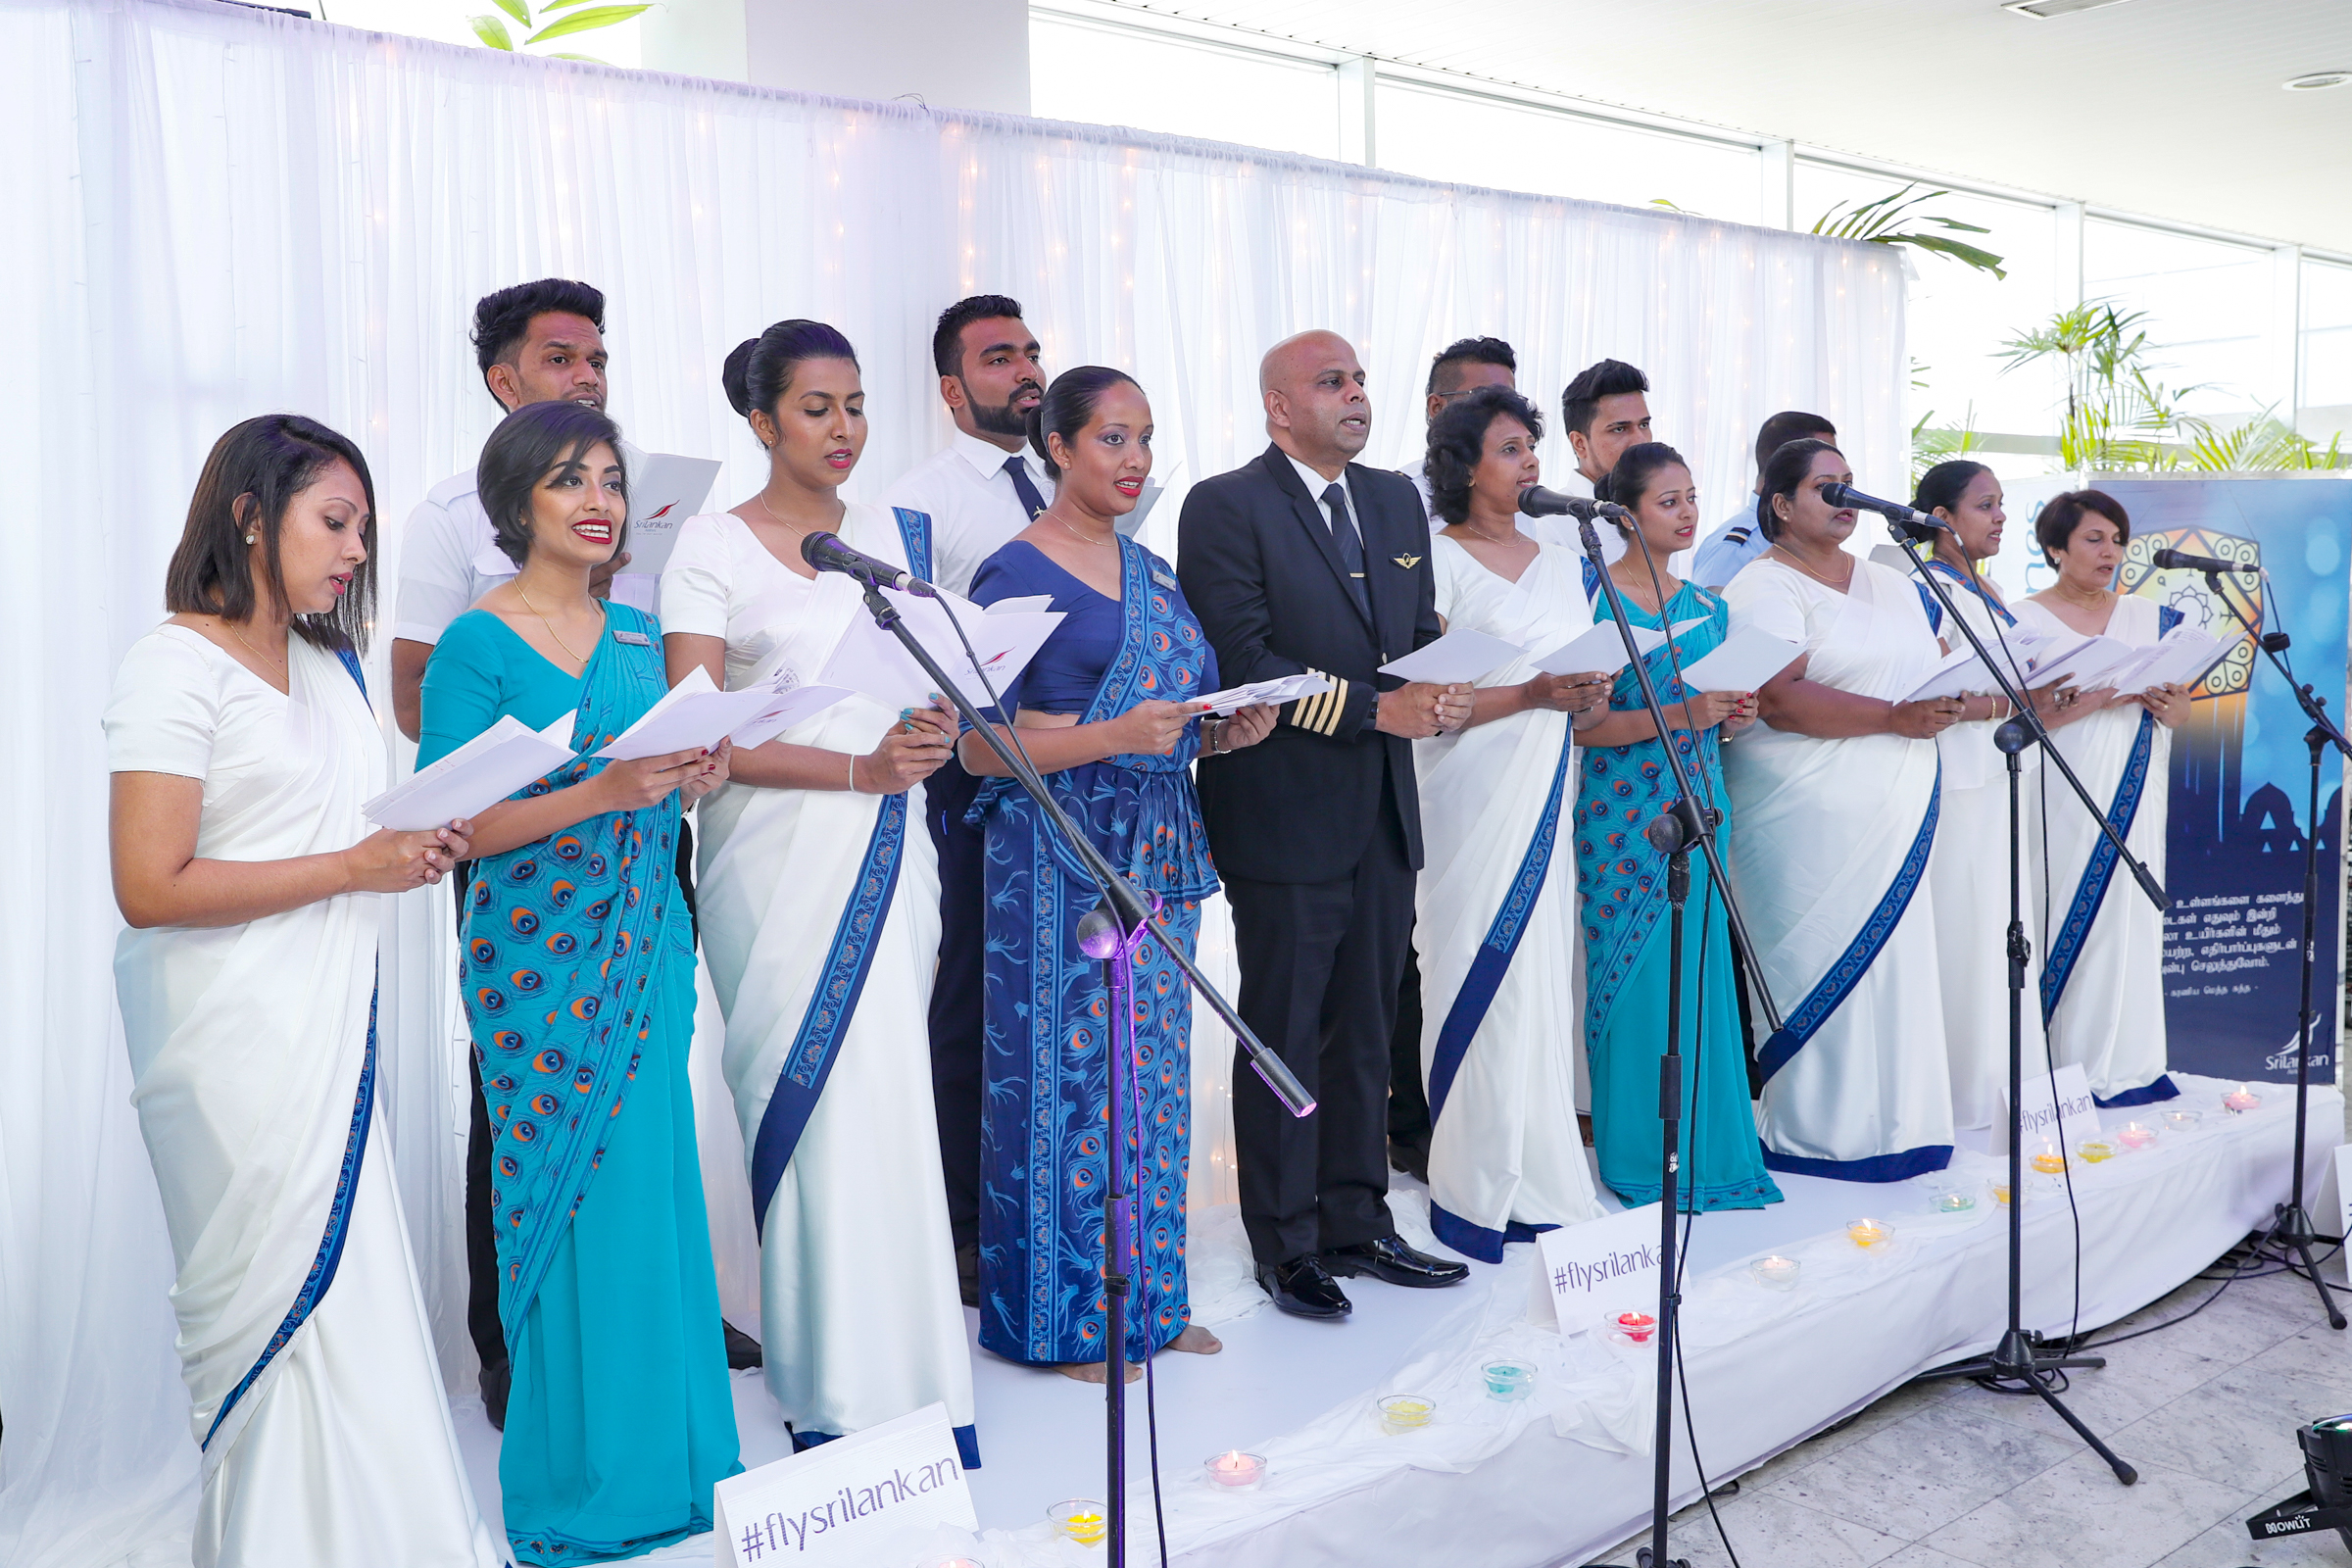 Bhakthi Gee sung by SriLankan Airlines staff